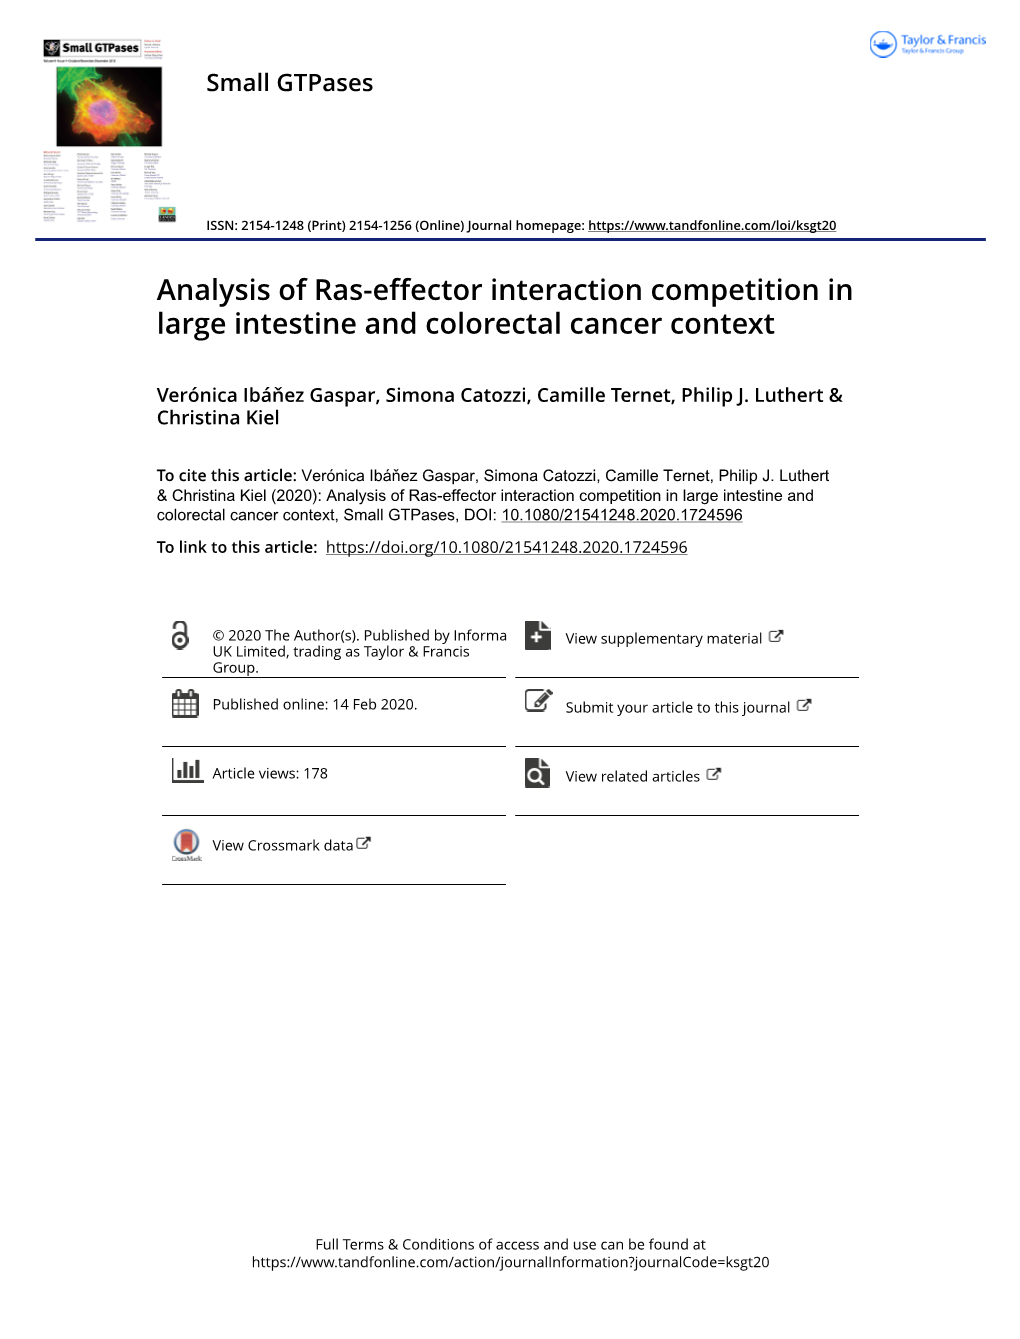 Analysis of Ras-Effector Interaction Competition in Large Intestine and Colorectal Cancer Context